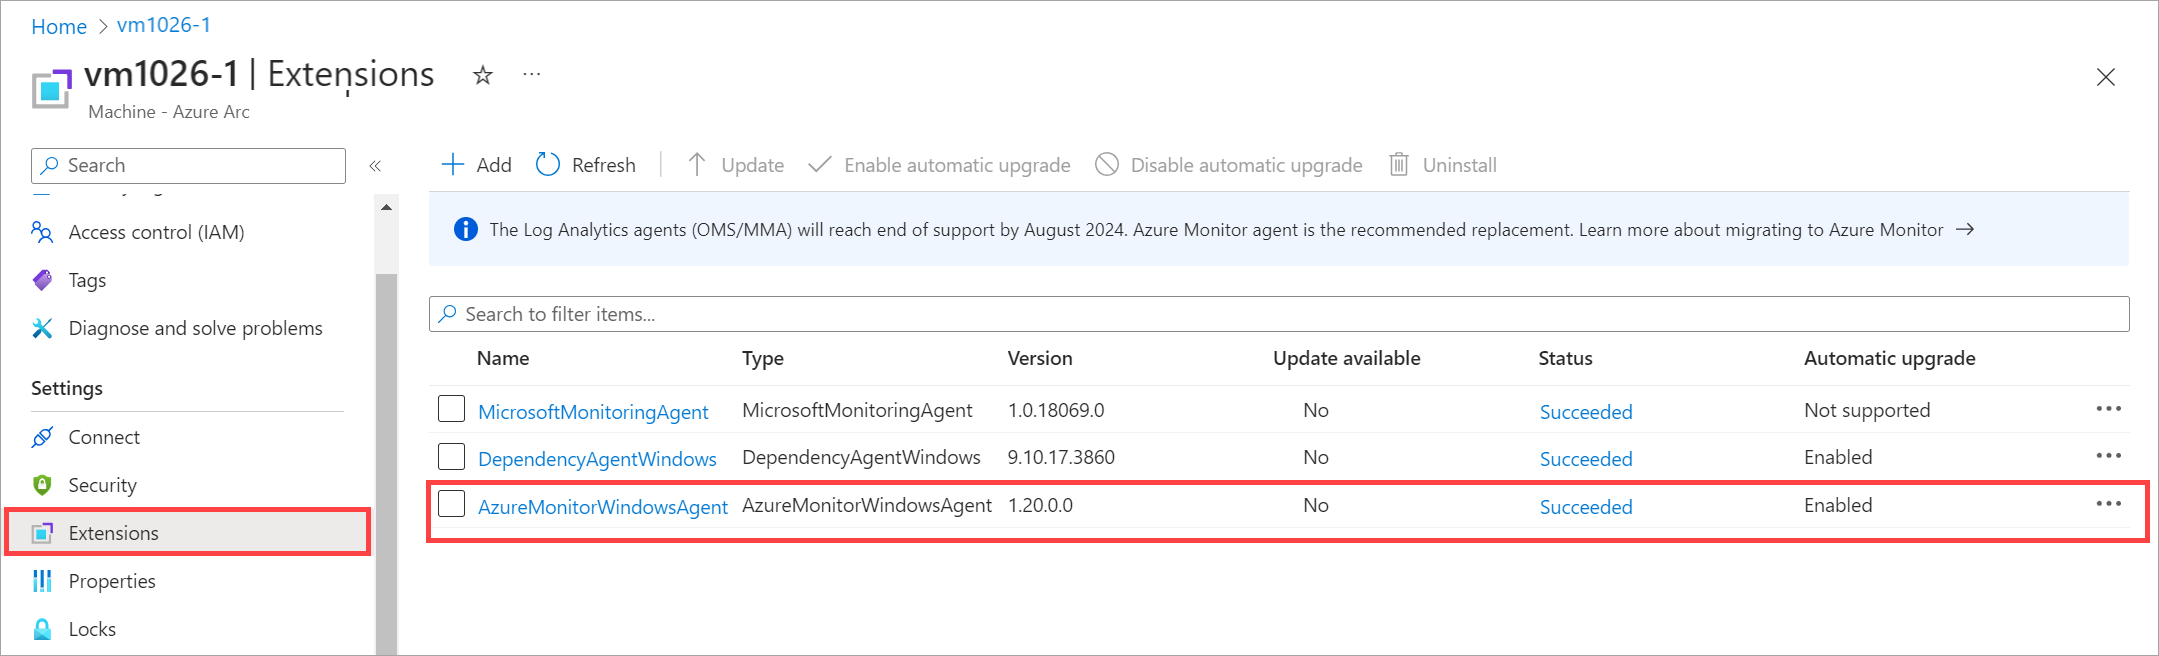 Screenshot showing configuration of Azure Monitor Extension installation in the chosen Arc VM.